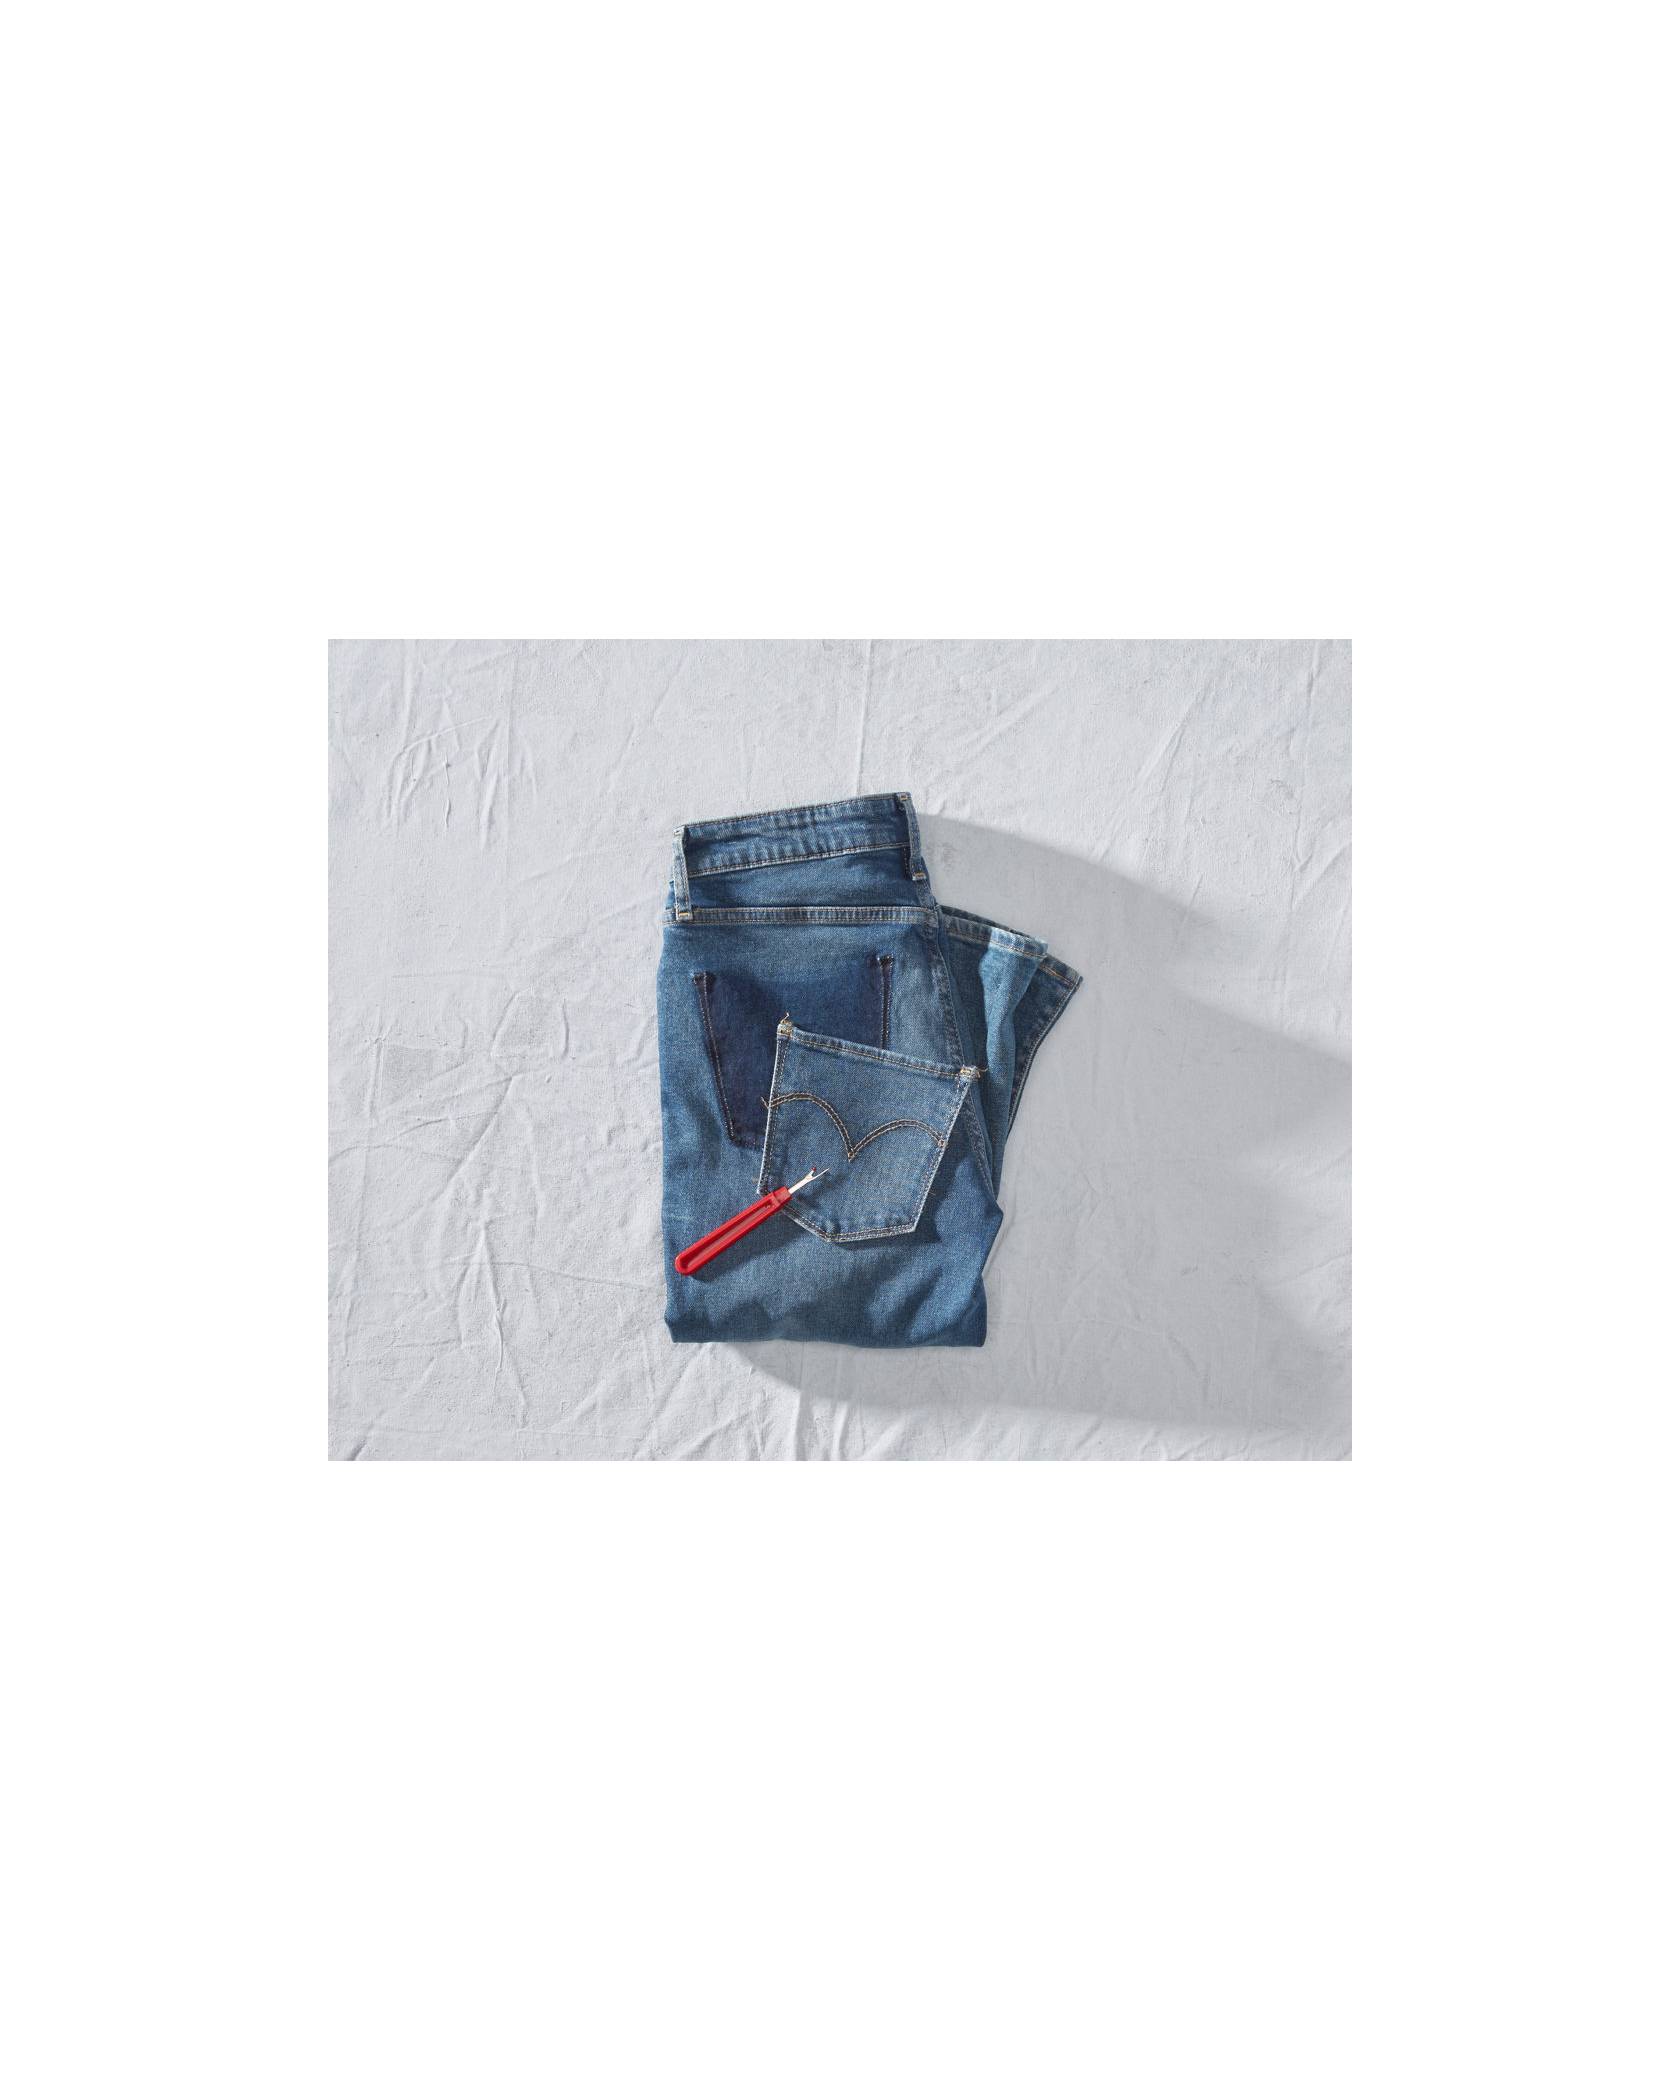 jeans laydown pocket removed